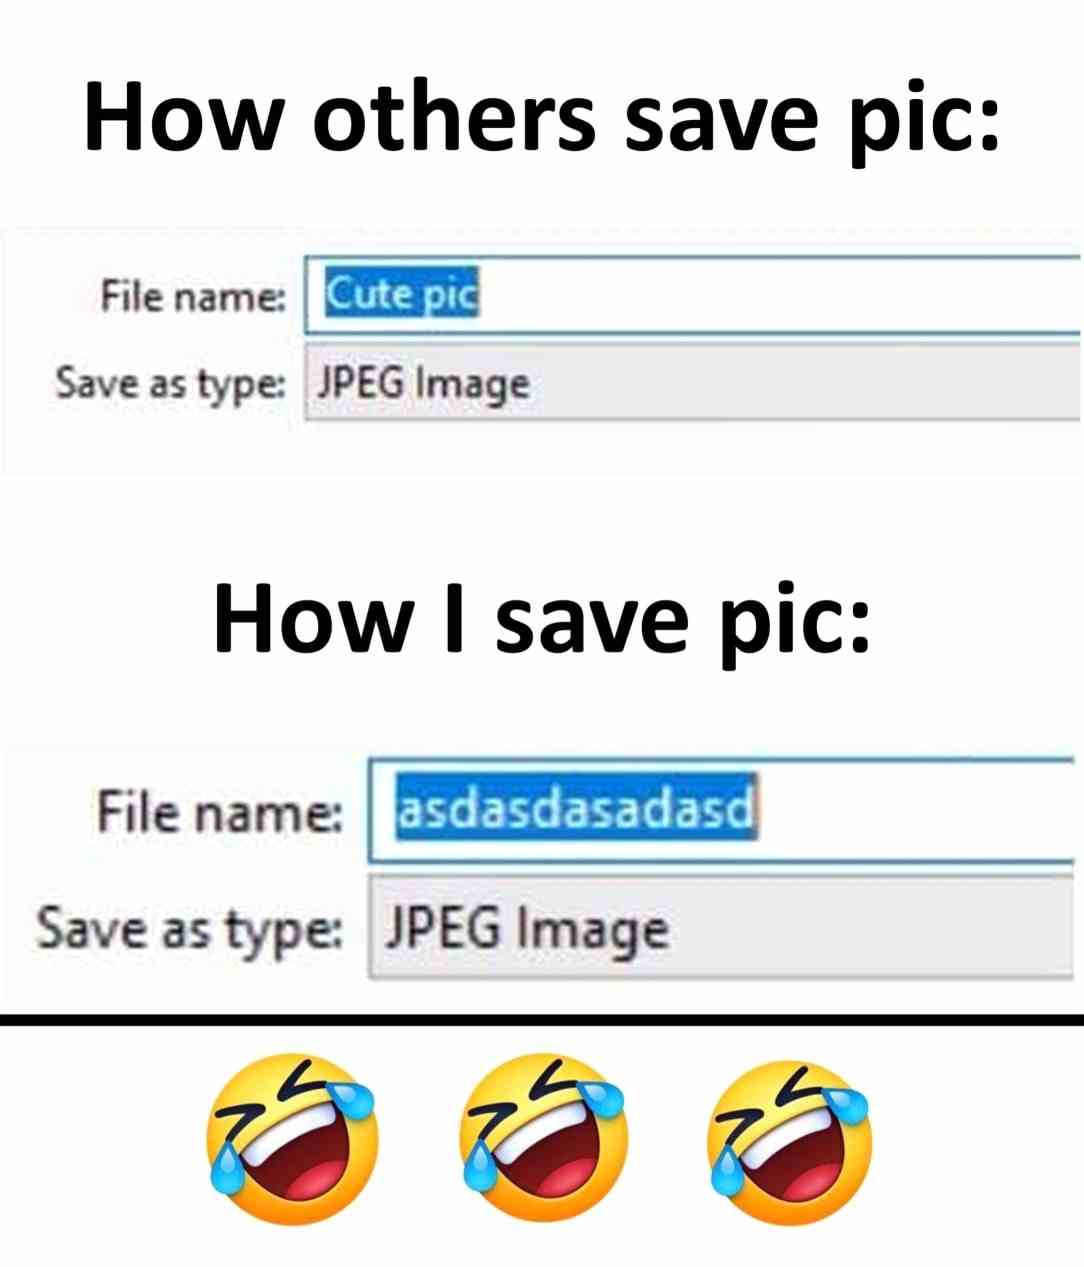 How Programmer save pic vs others